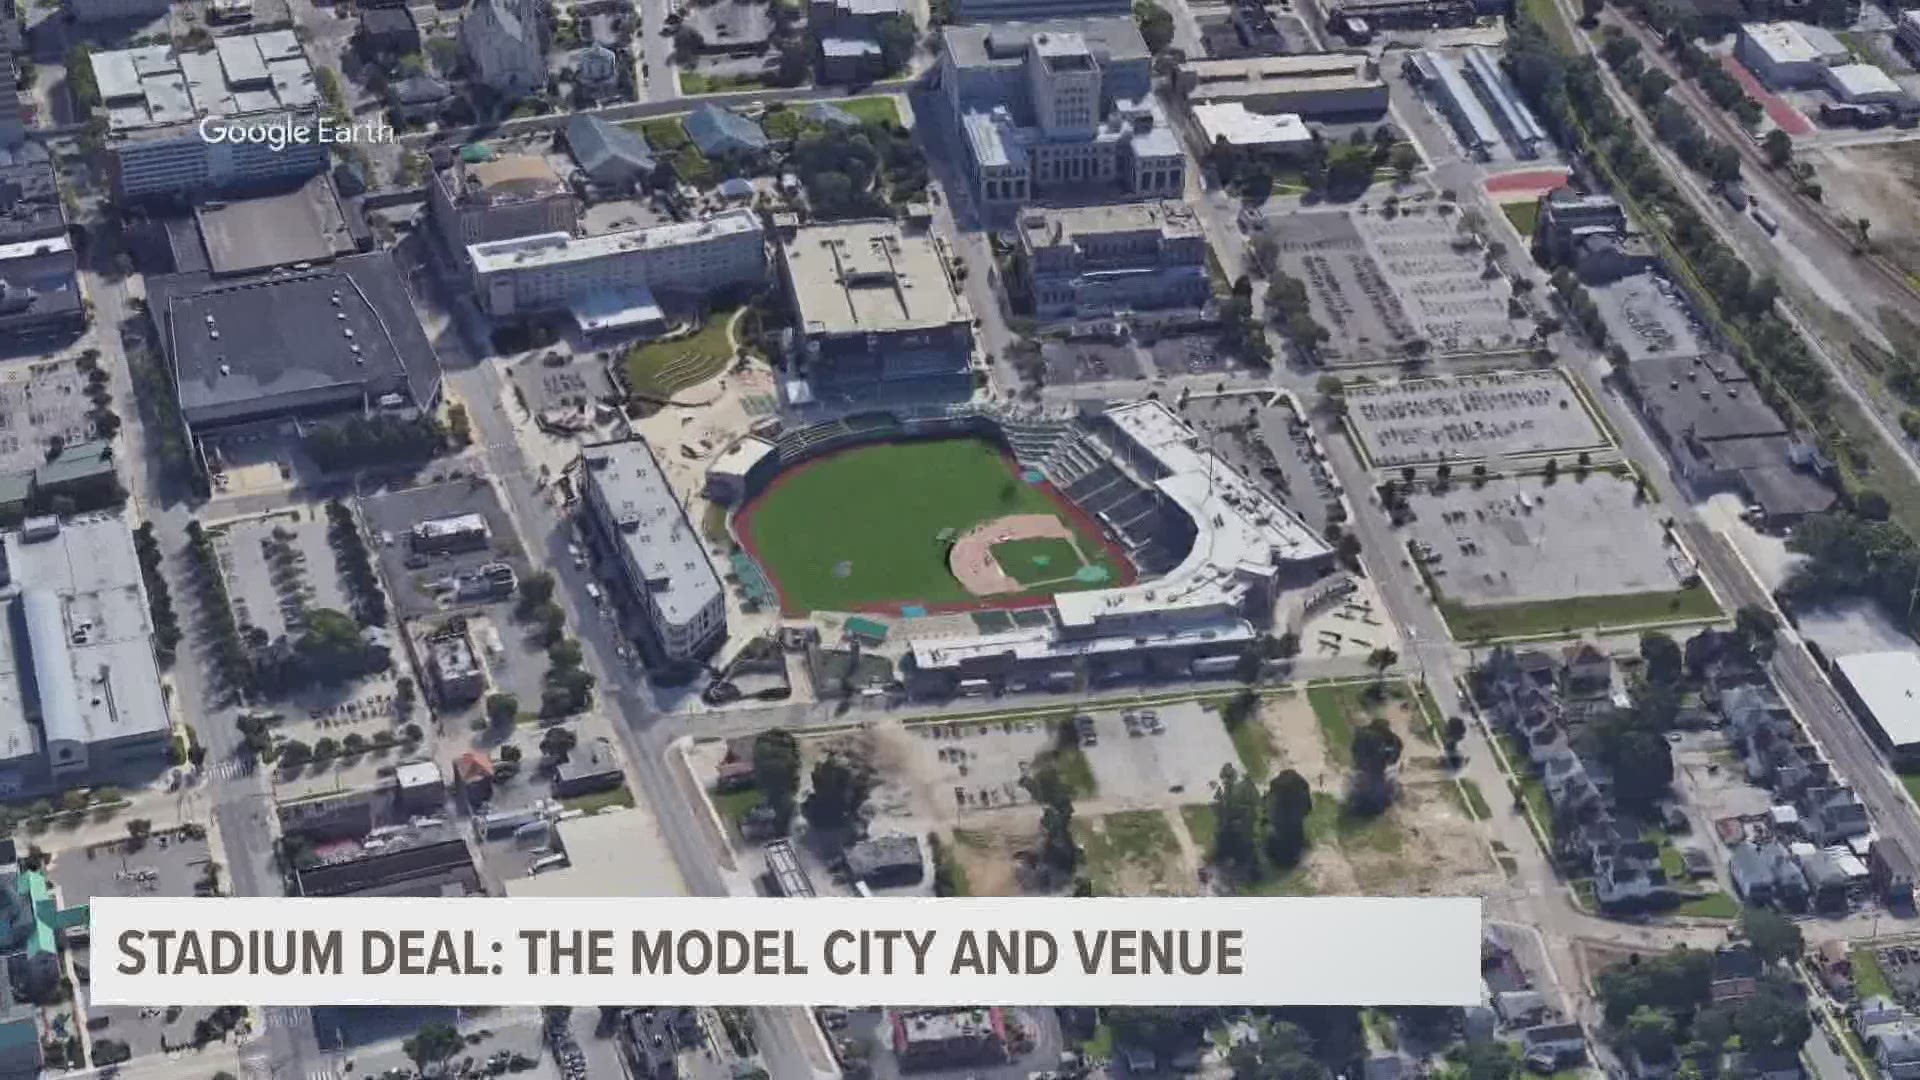 Fort Wayne, Ind.'s Parkview Field is held up as an example for Knoxville and the county.